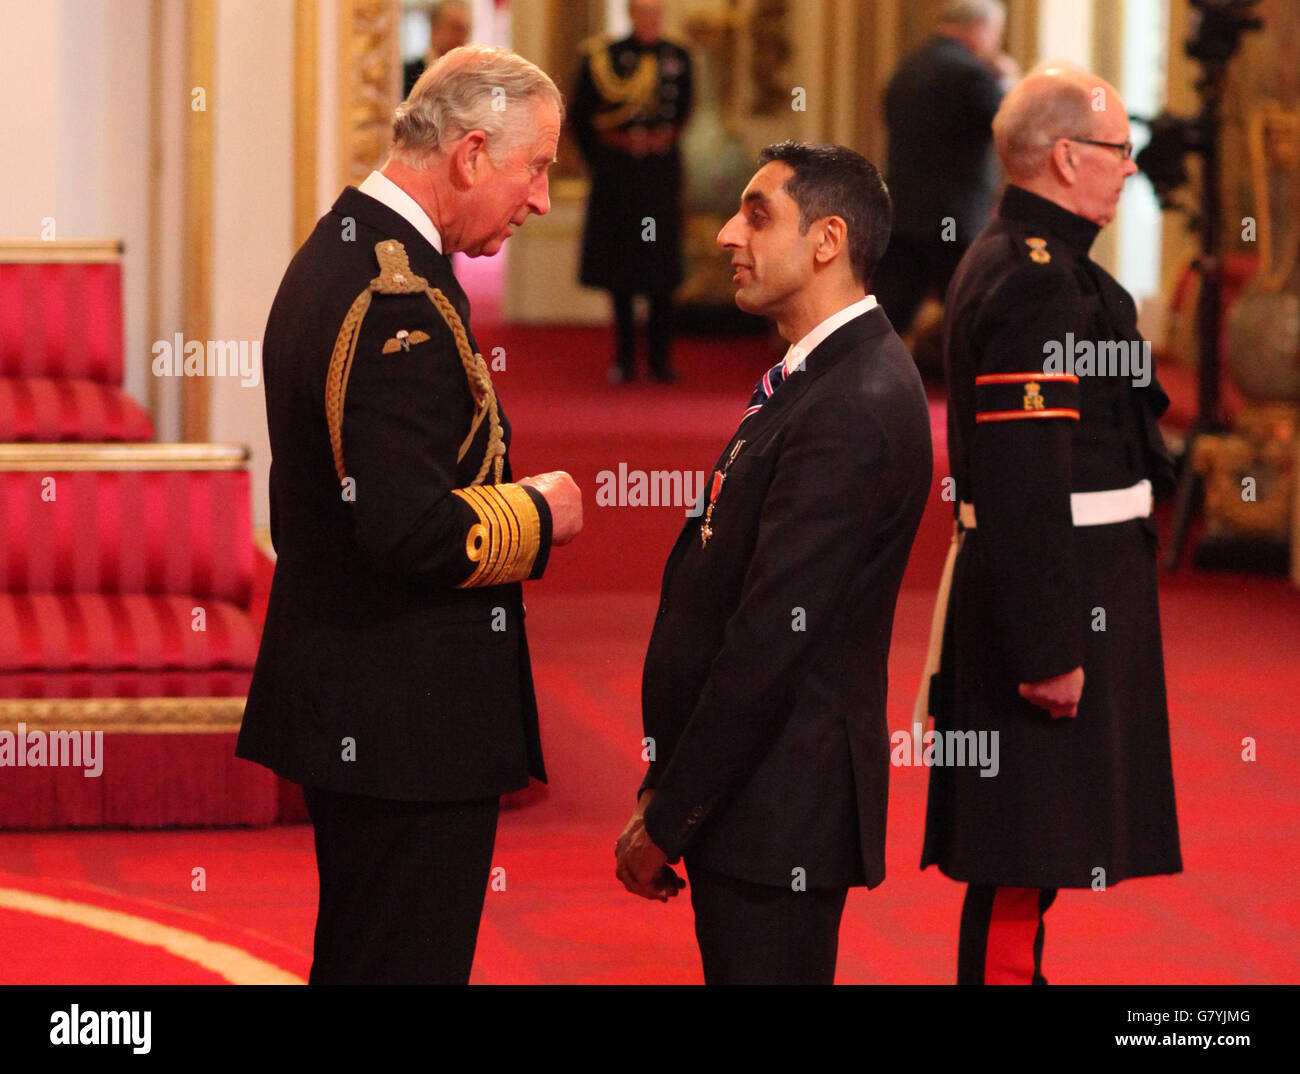 Mr Jatinder Sharma from Wolverhampton is made an Officer of the Order of the British Empire (OBE) by the Prince of Wales at an Investiture ceremony at Buckingham Palace, London. Stock Photo